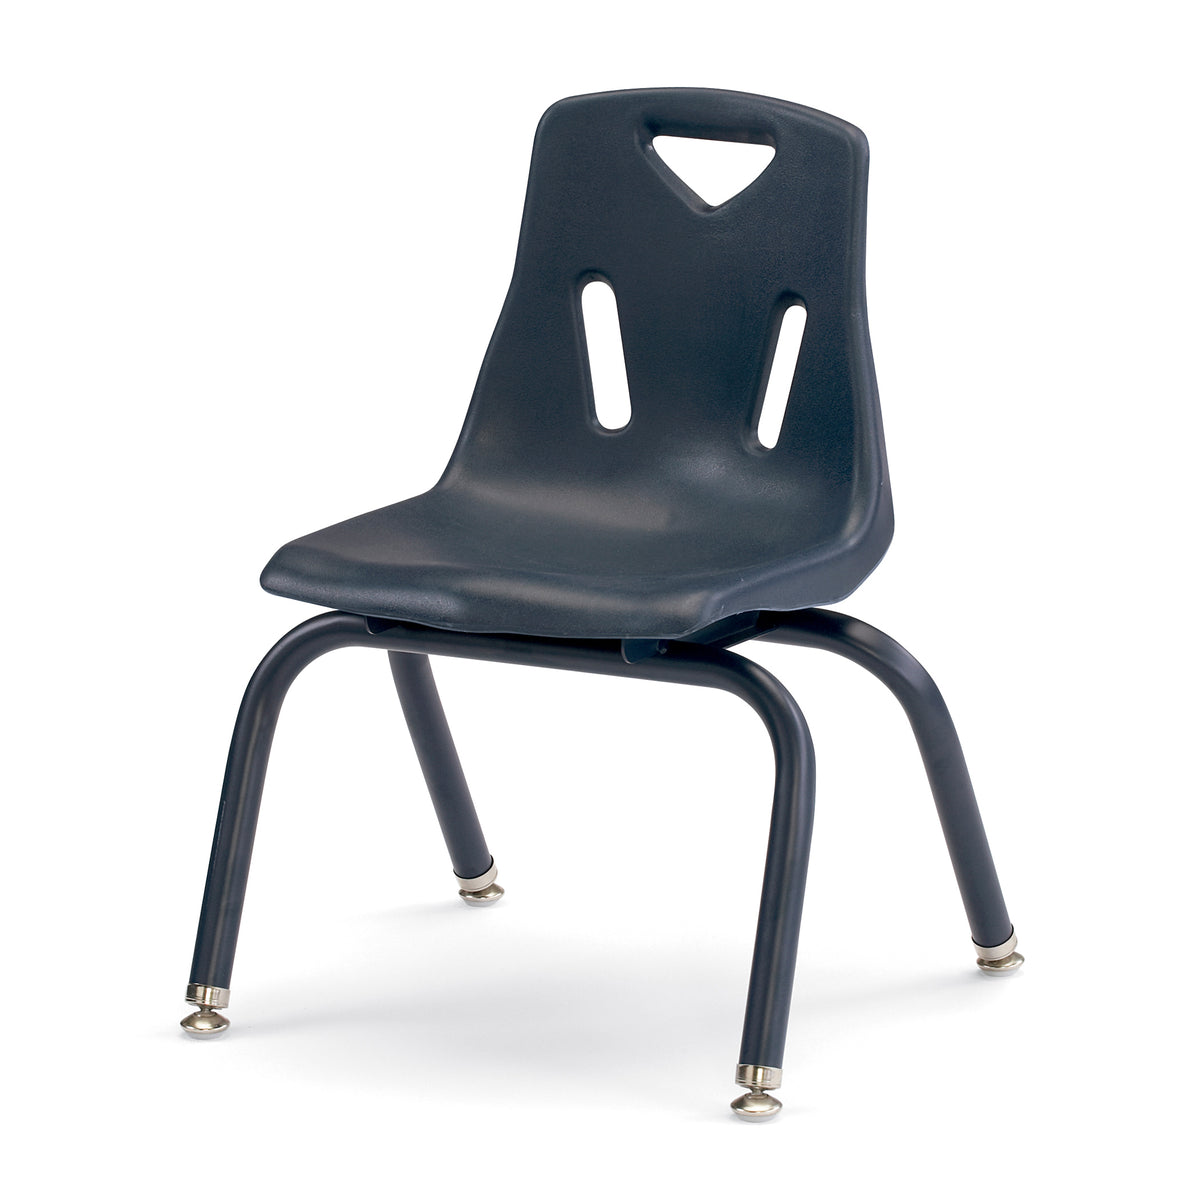 8122JC6112, Berries Stacking Chairs with Powder-Coated Legs - 12" Ht - Set of 6 - Navy